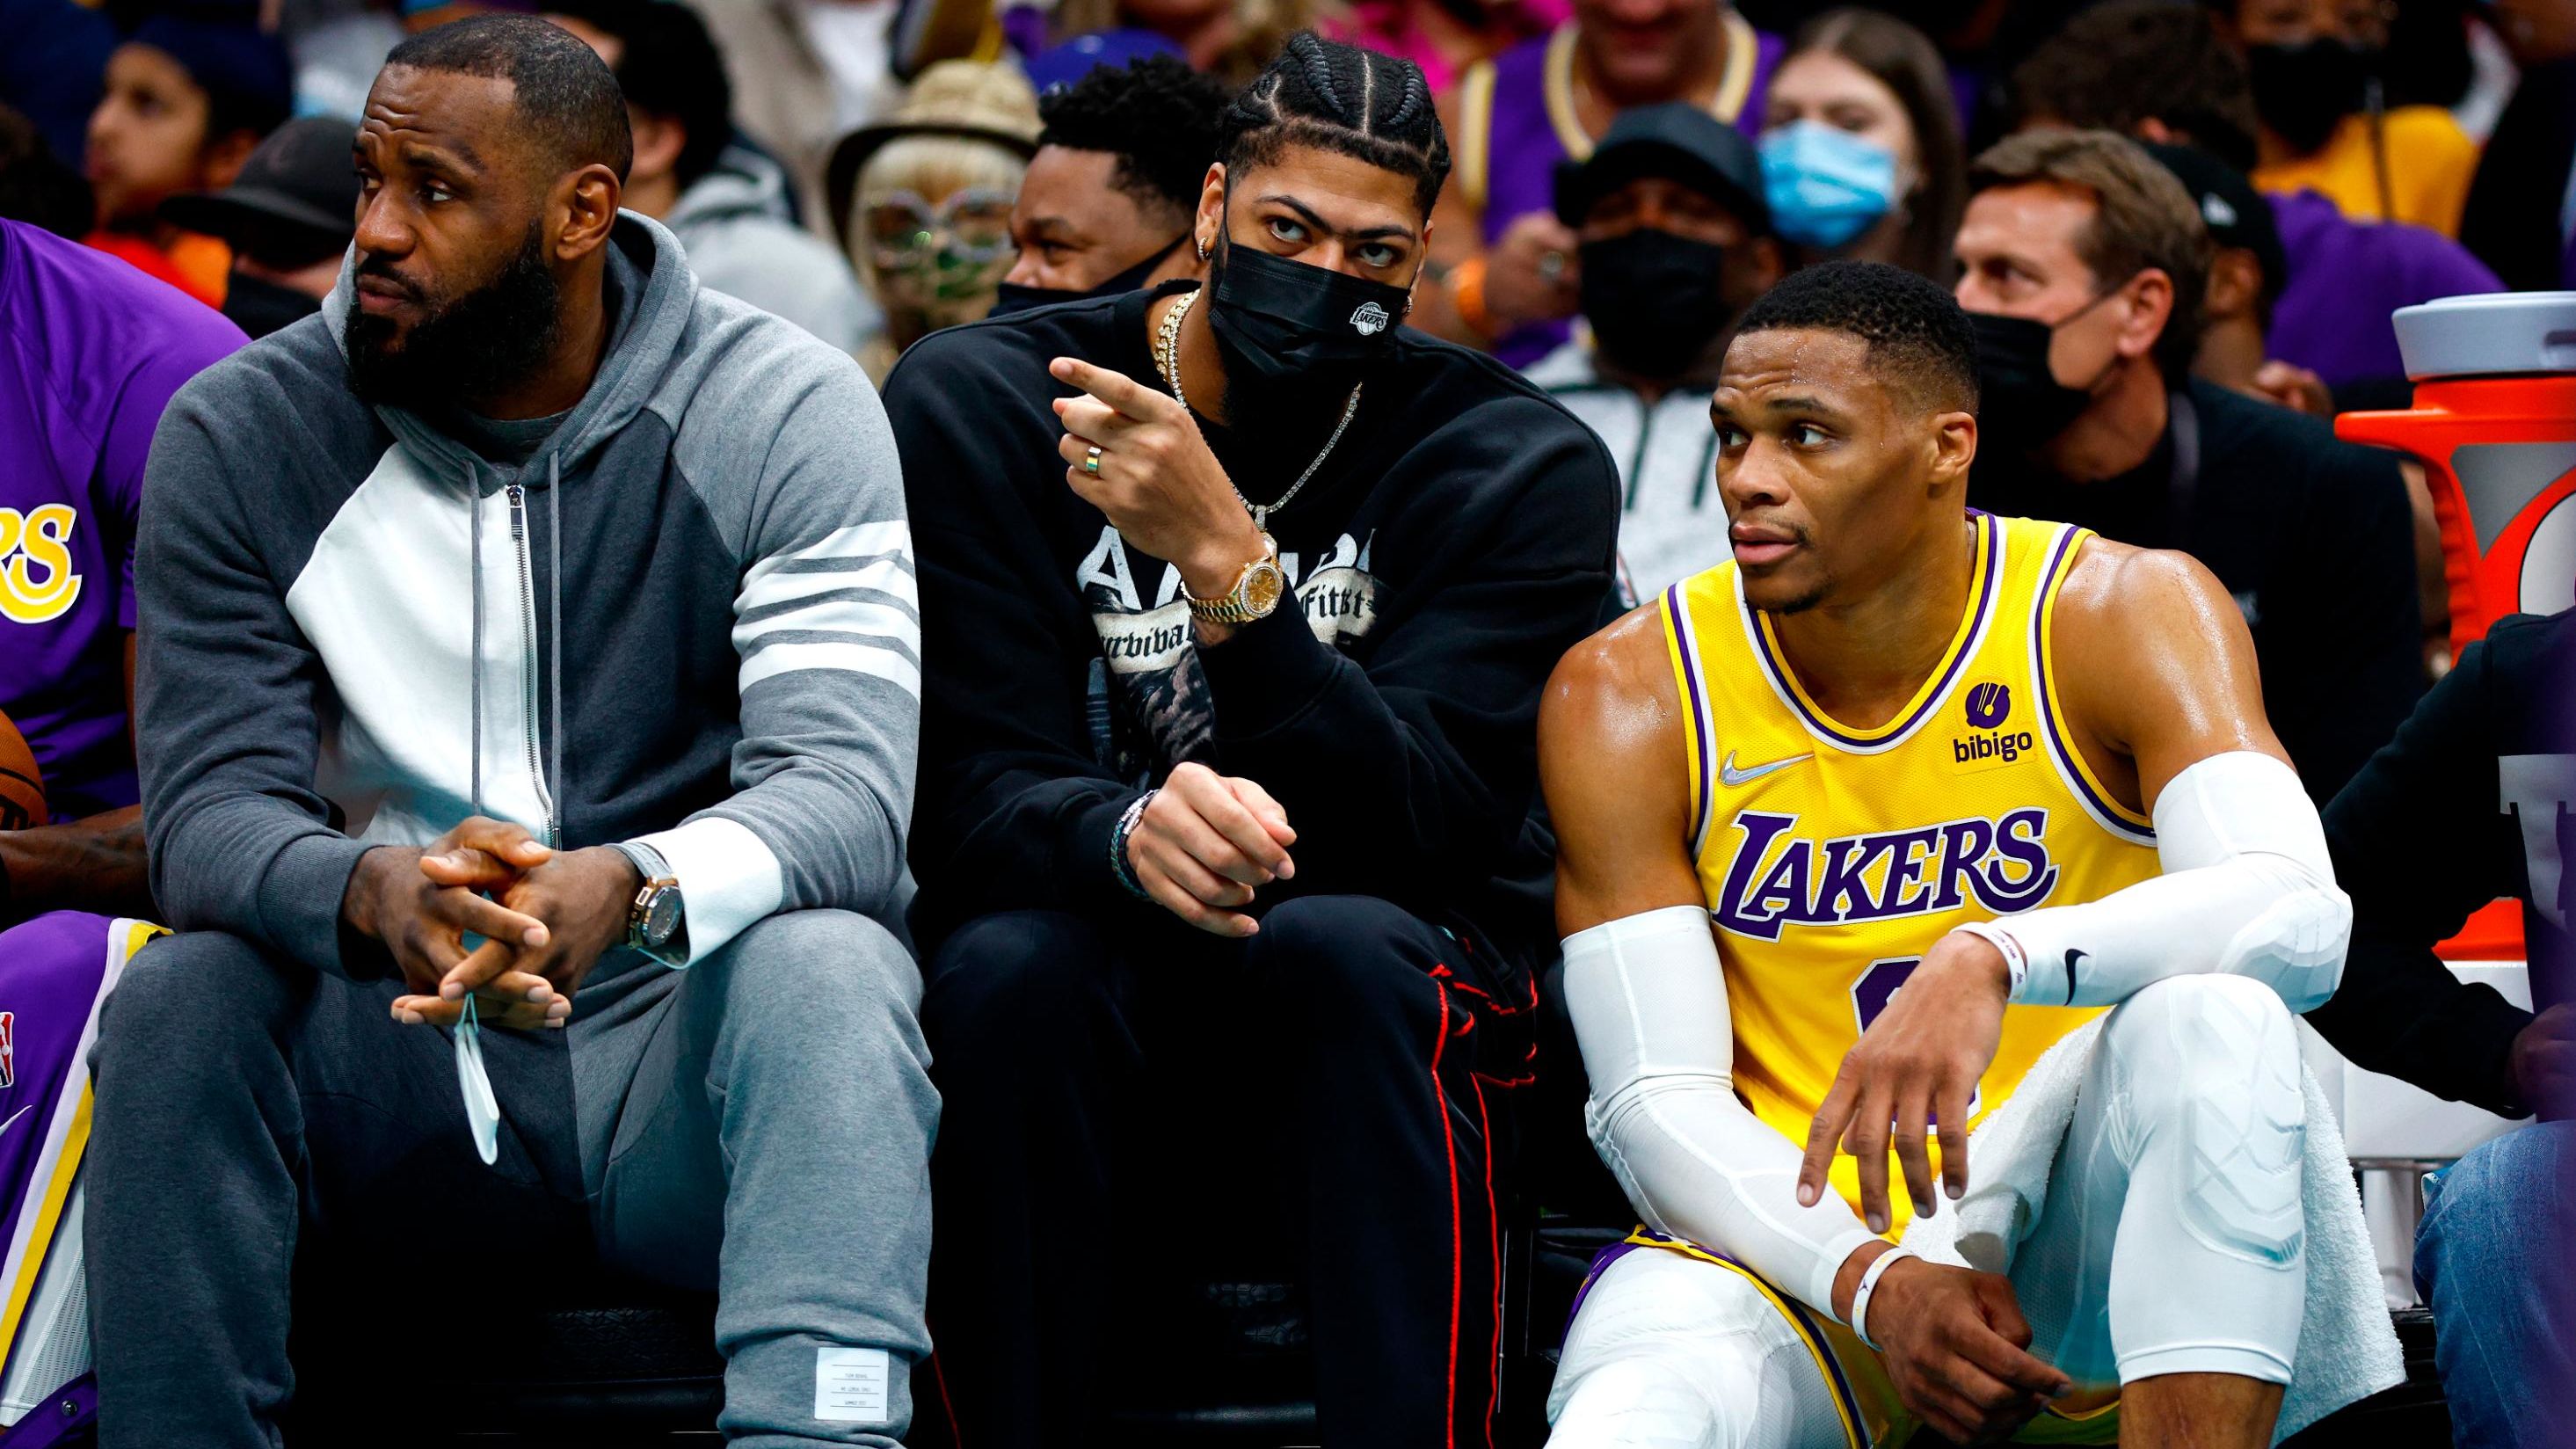 LeBron James, Anthony Davis and Russell Westbrook look on from the sidelines during the Lakers' game against the Charlotte Hornets at Spectrum Center on January 28, 2022 in Charlotte.